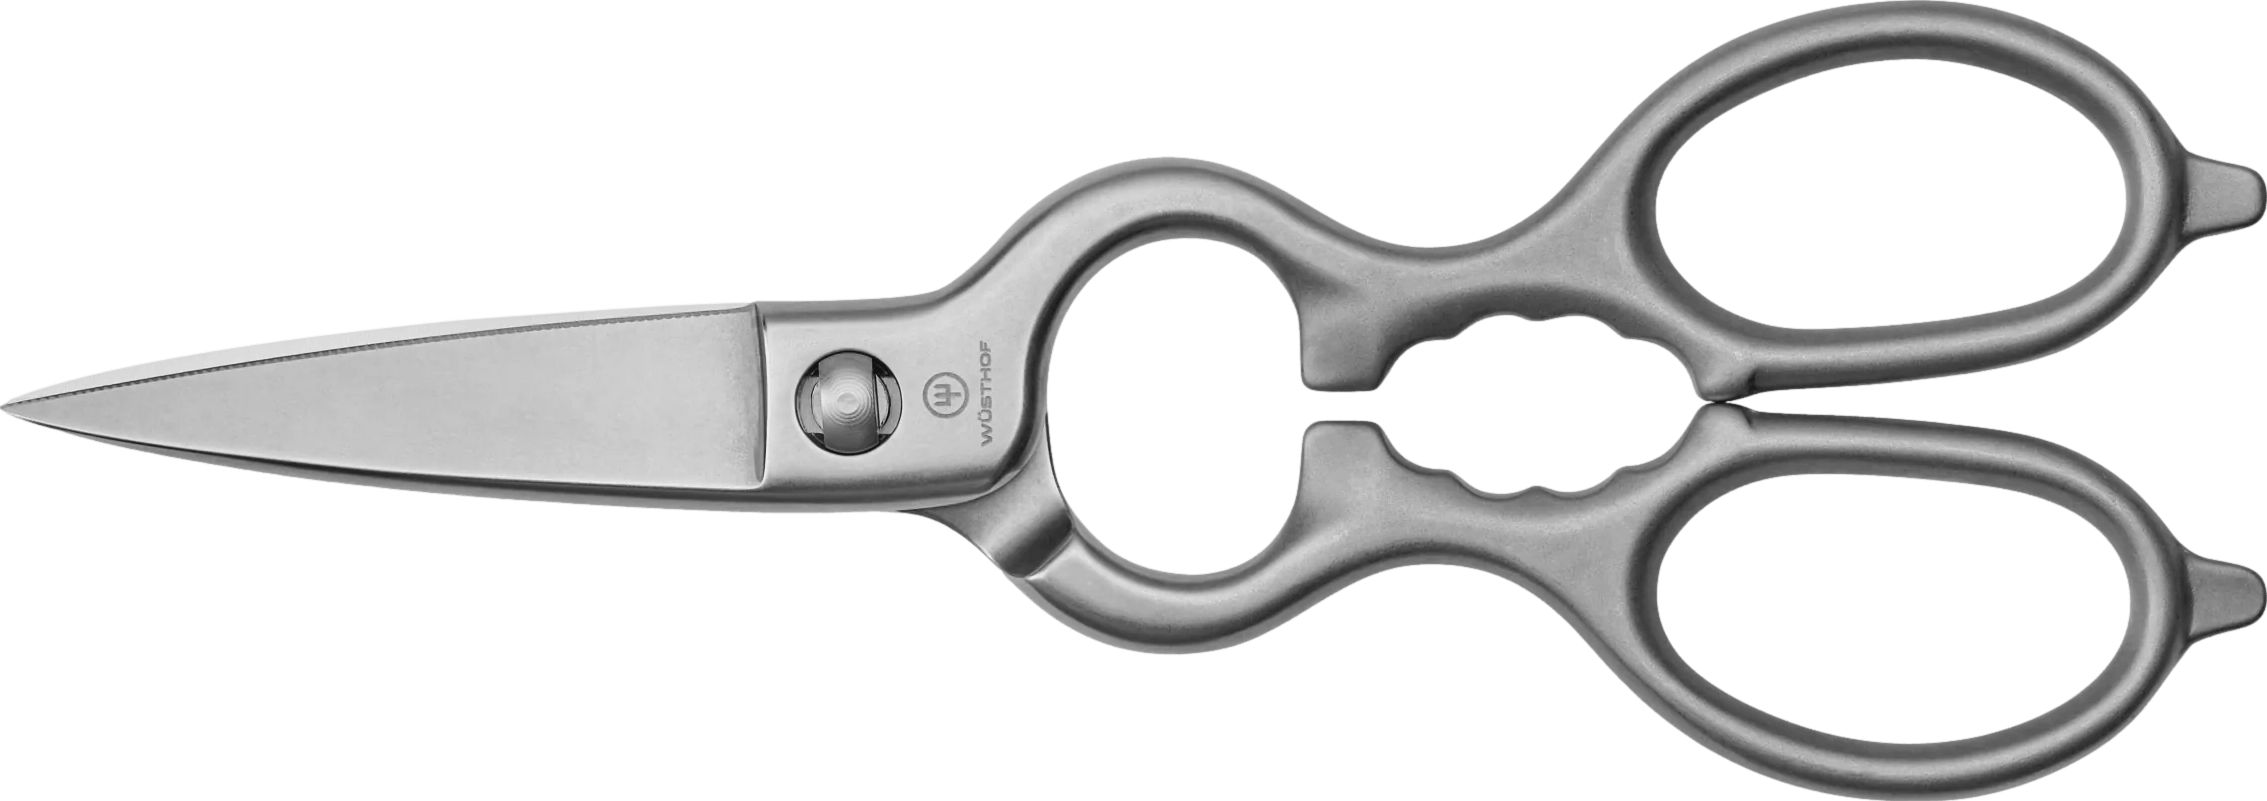 Wusthof Come Apart Kitchen Shears or Scissors Stainless Steel